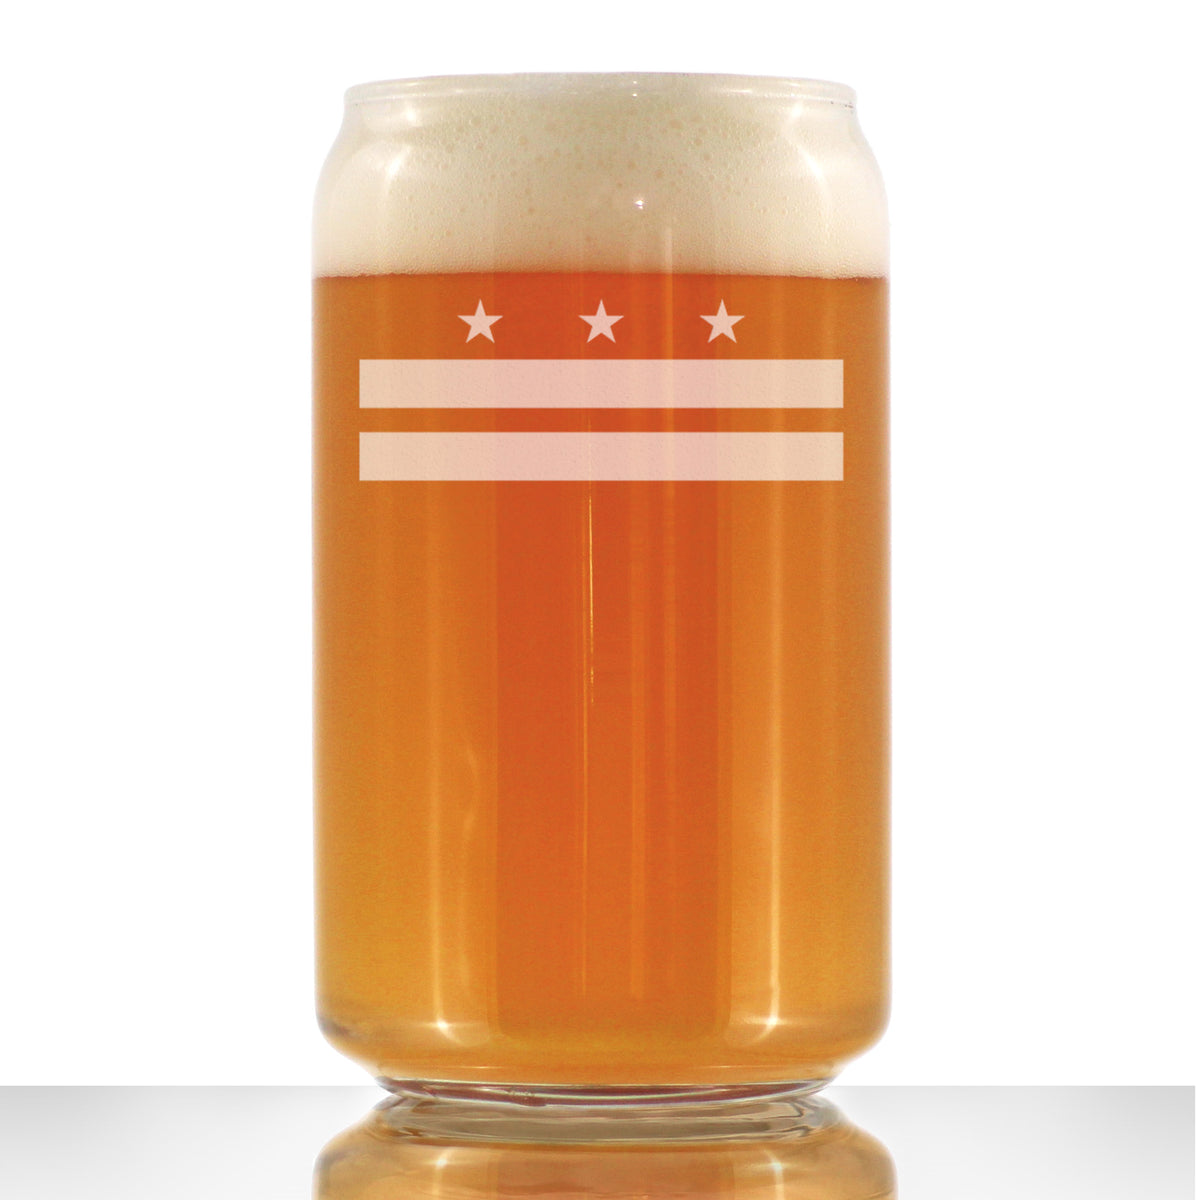 Washington DC Flag - Cute DC Flag Beer Can Pint Glass, Large 16 Ounce Size, Etched Sayings, Gift for Washingtonian